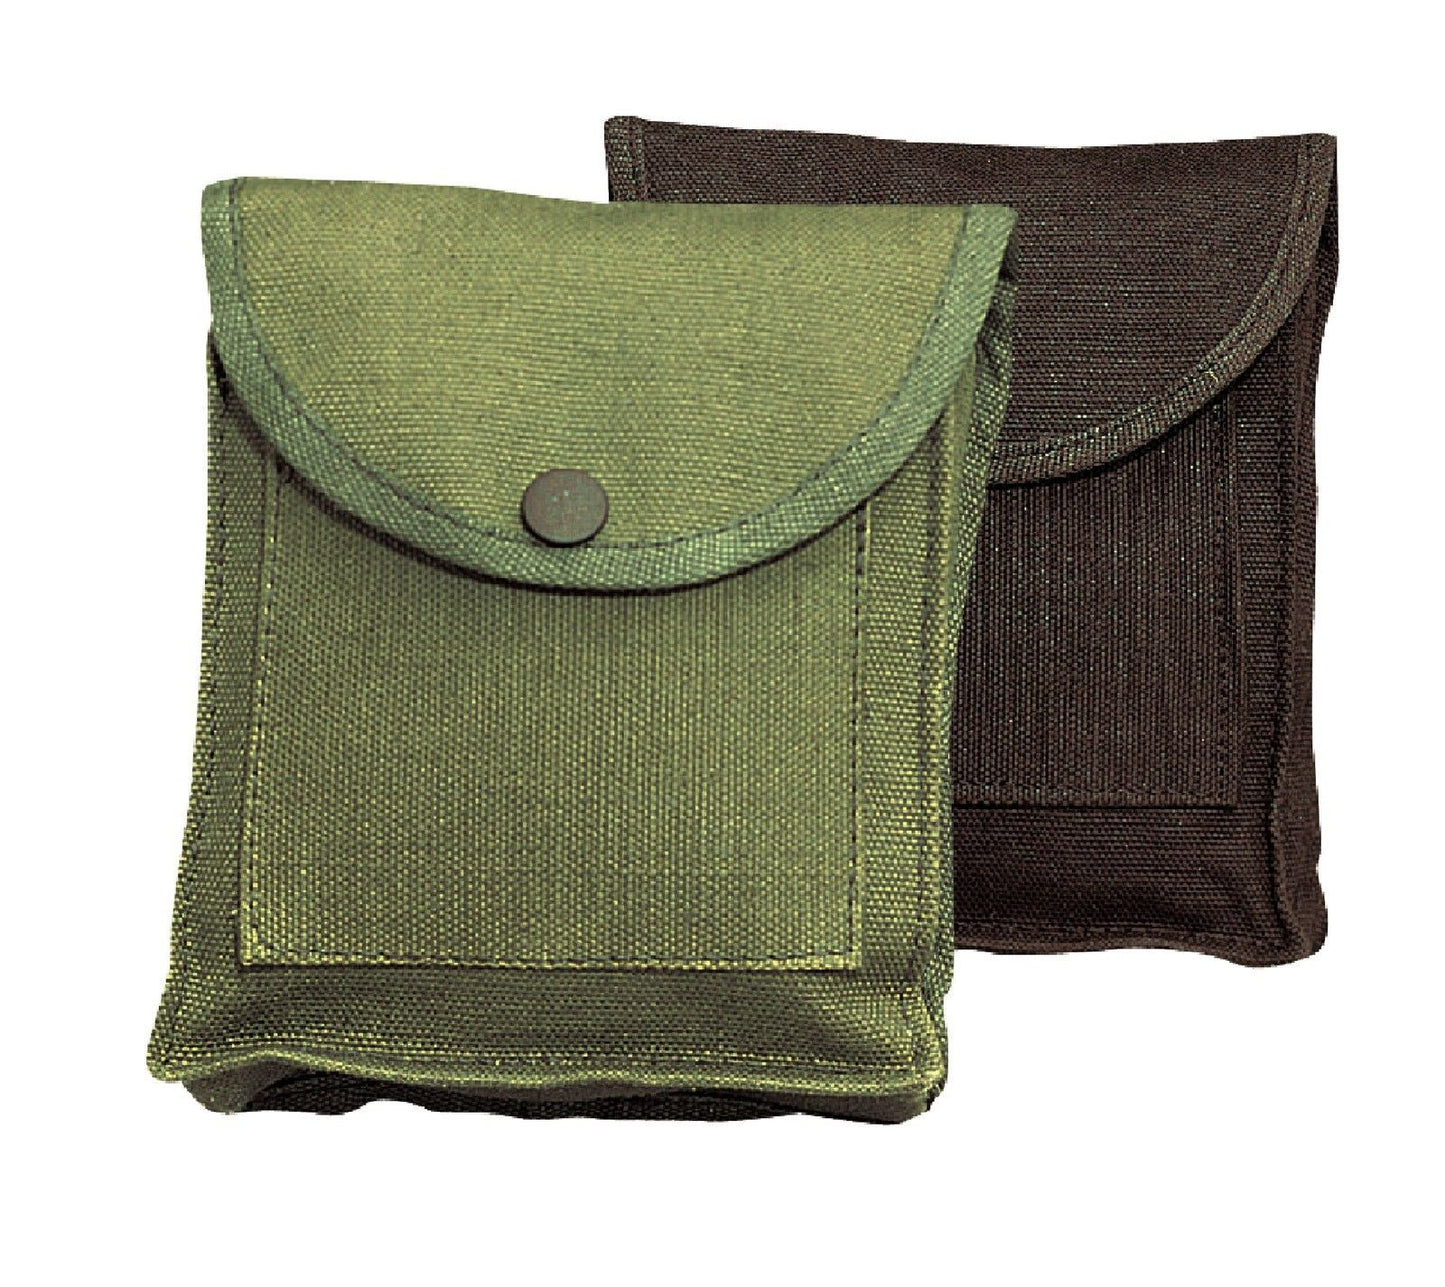 Canvas Utility Pouch w/ Belt Loop - Hiking Camping Compact Pocket Pouches